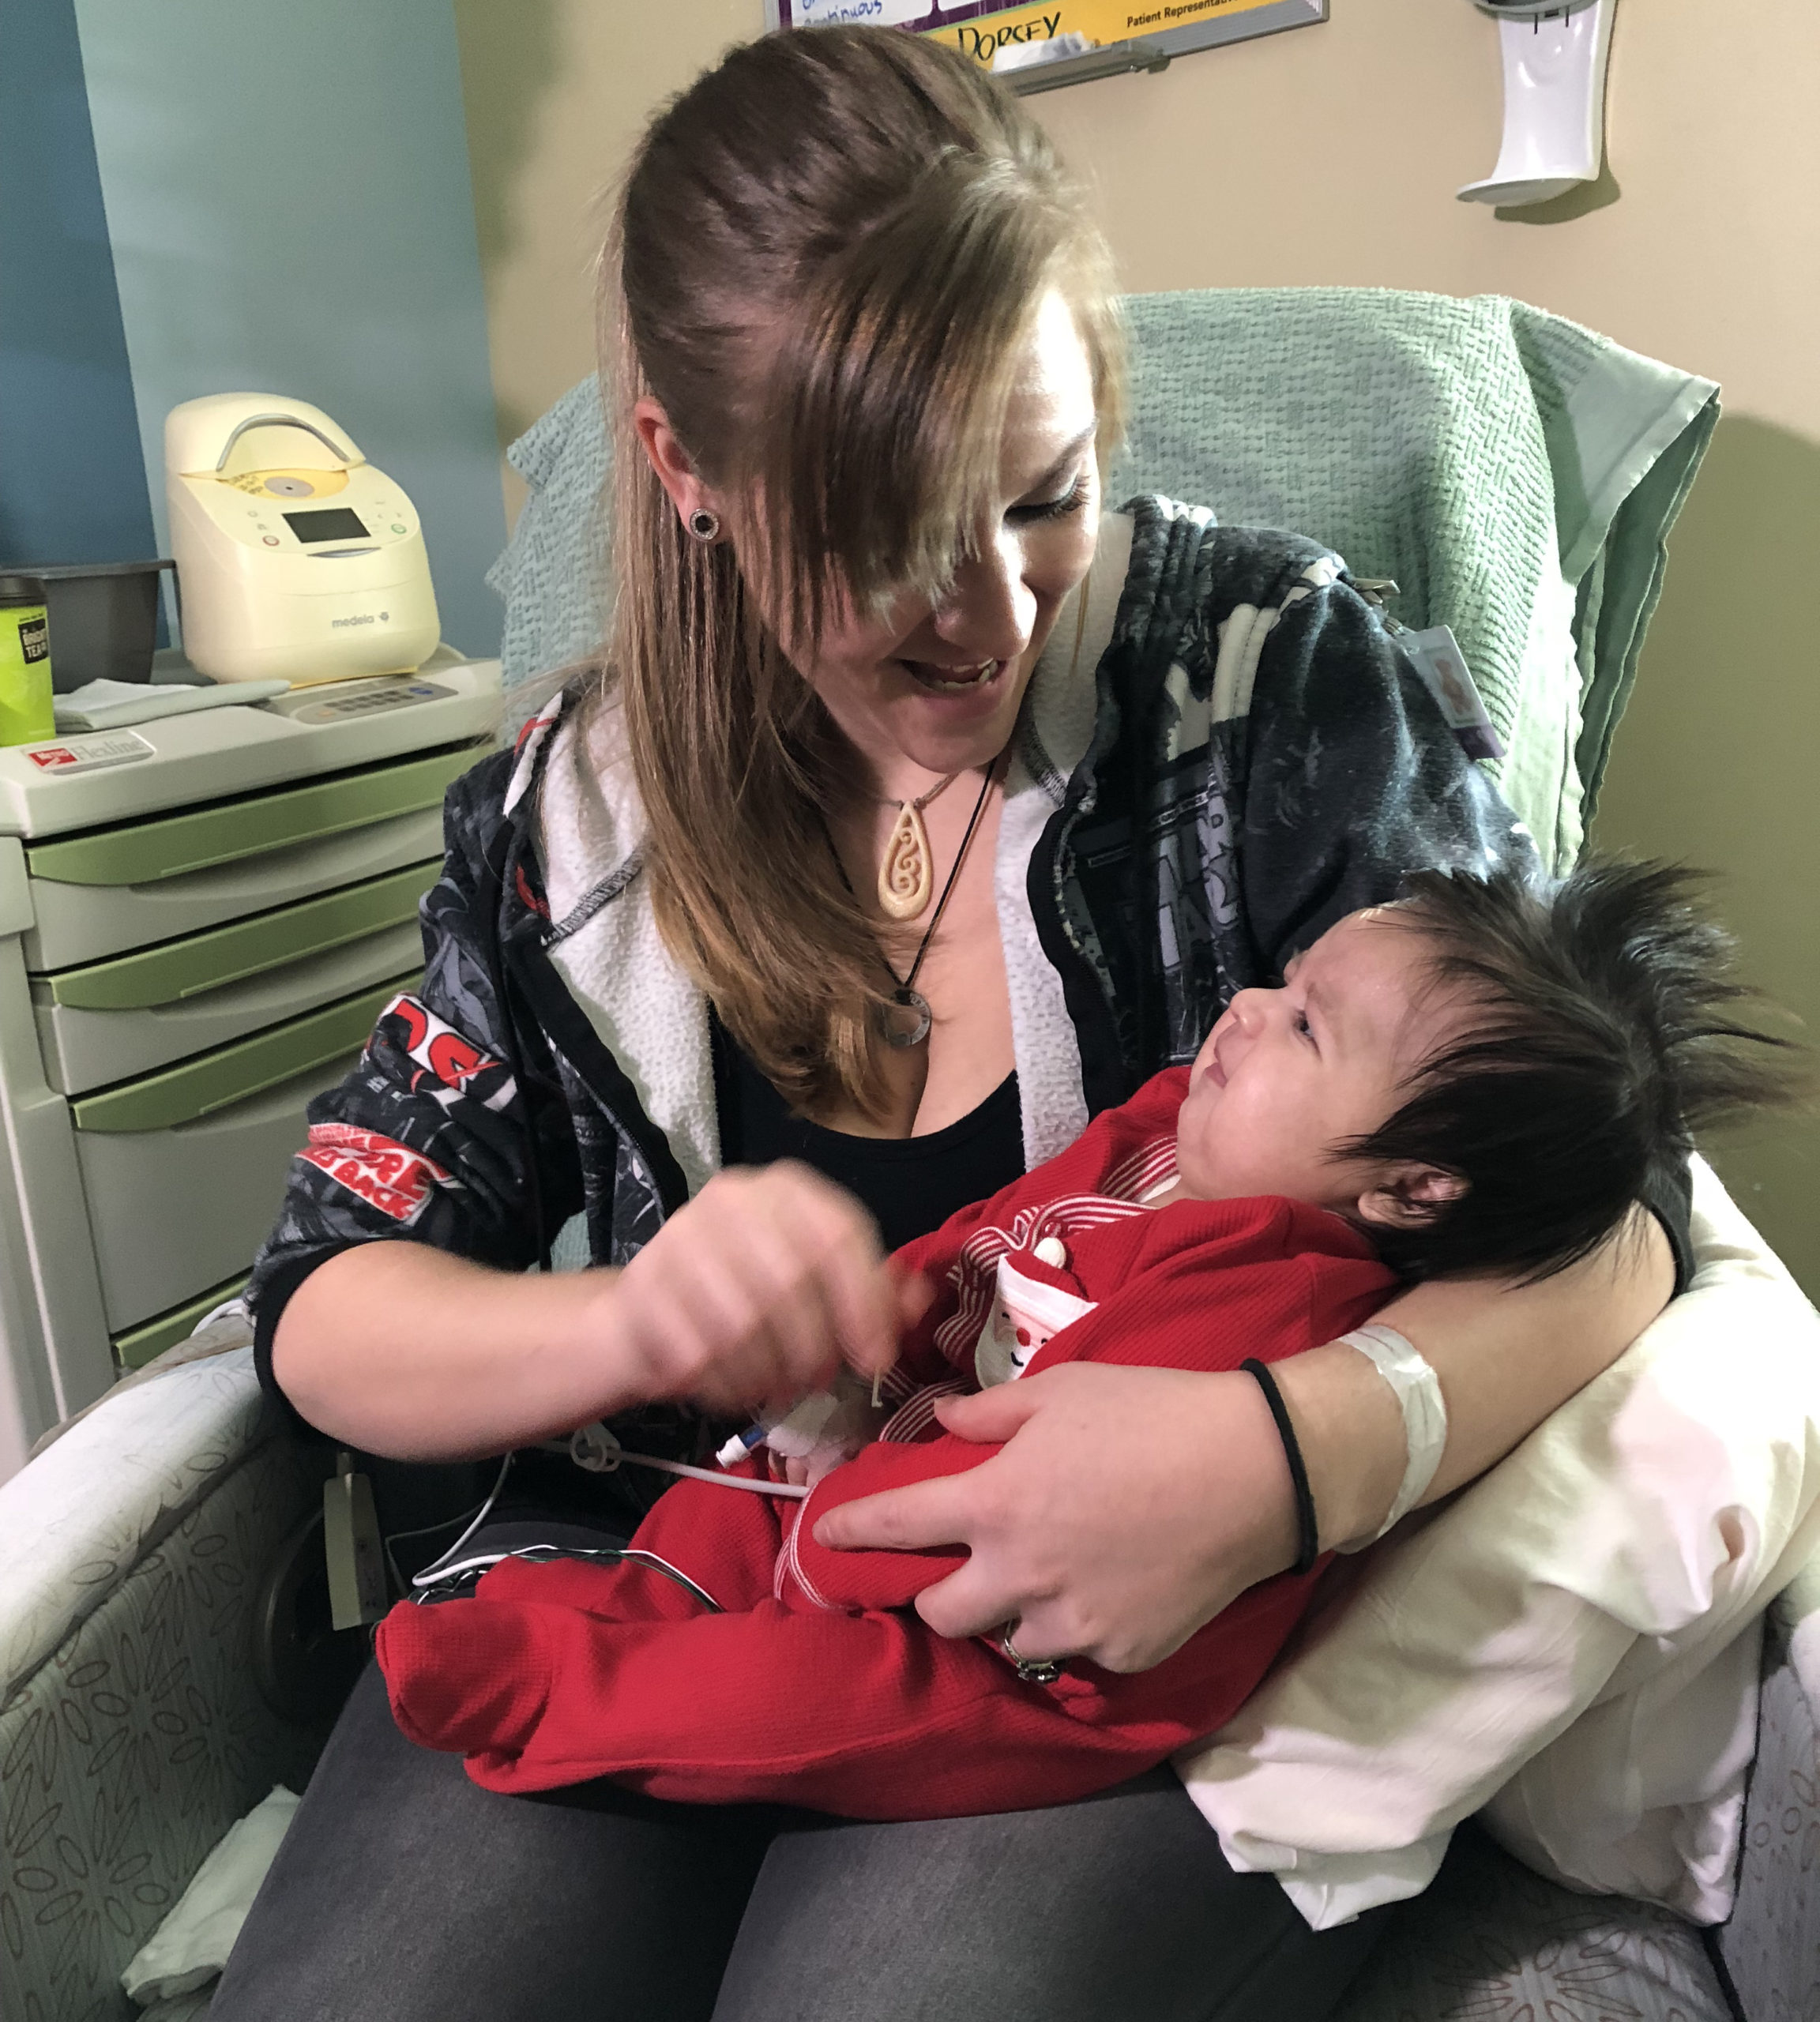 Woman holding baby in hospital room